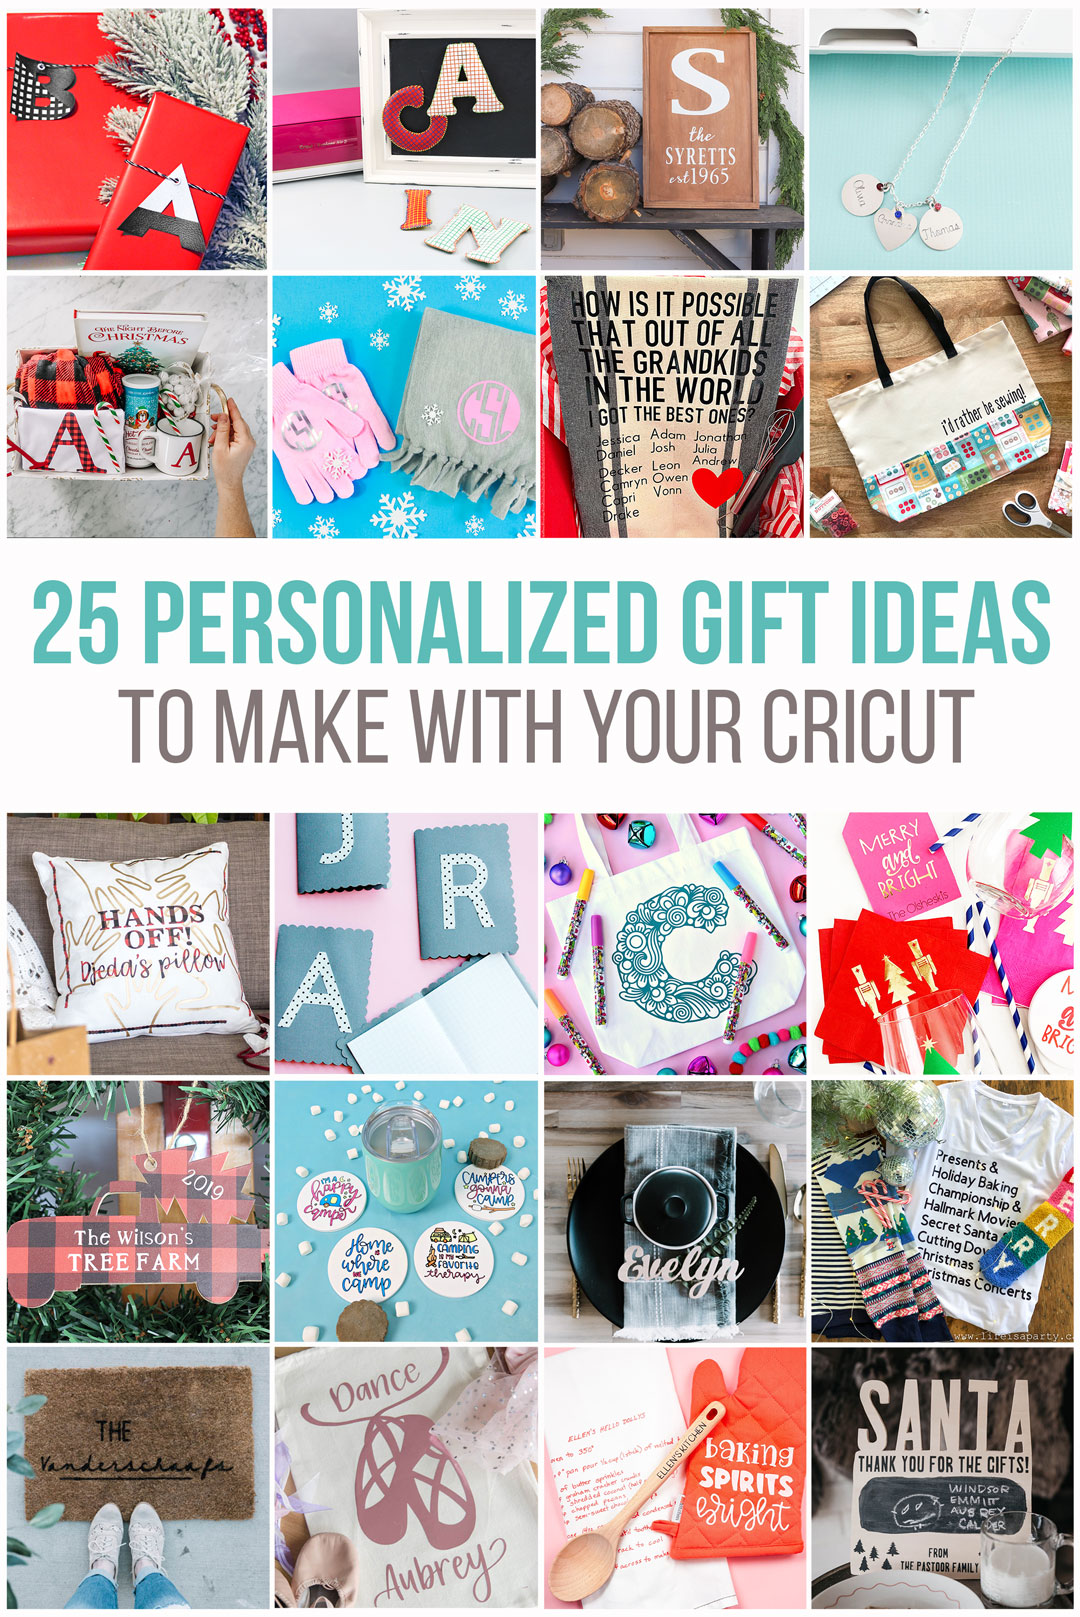 25 beautiful personalized gift ideas to make with your Cricut